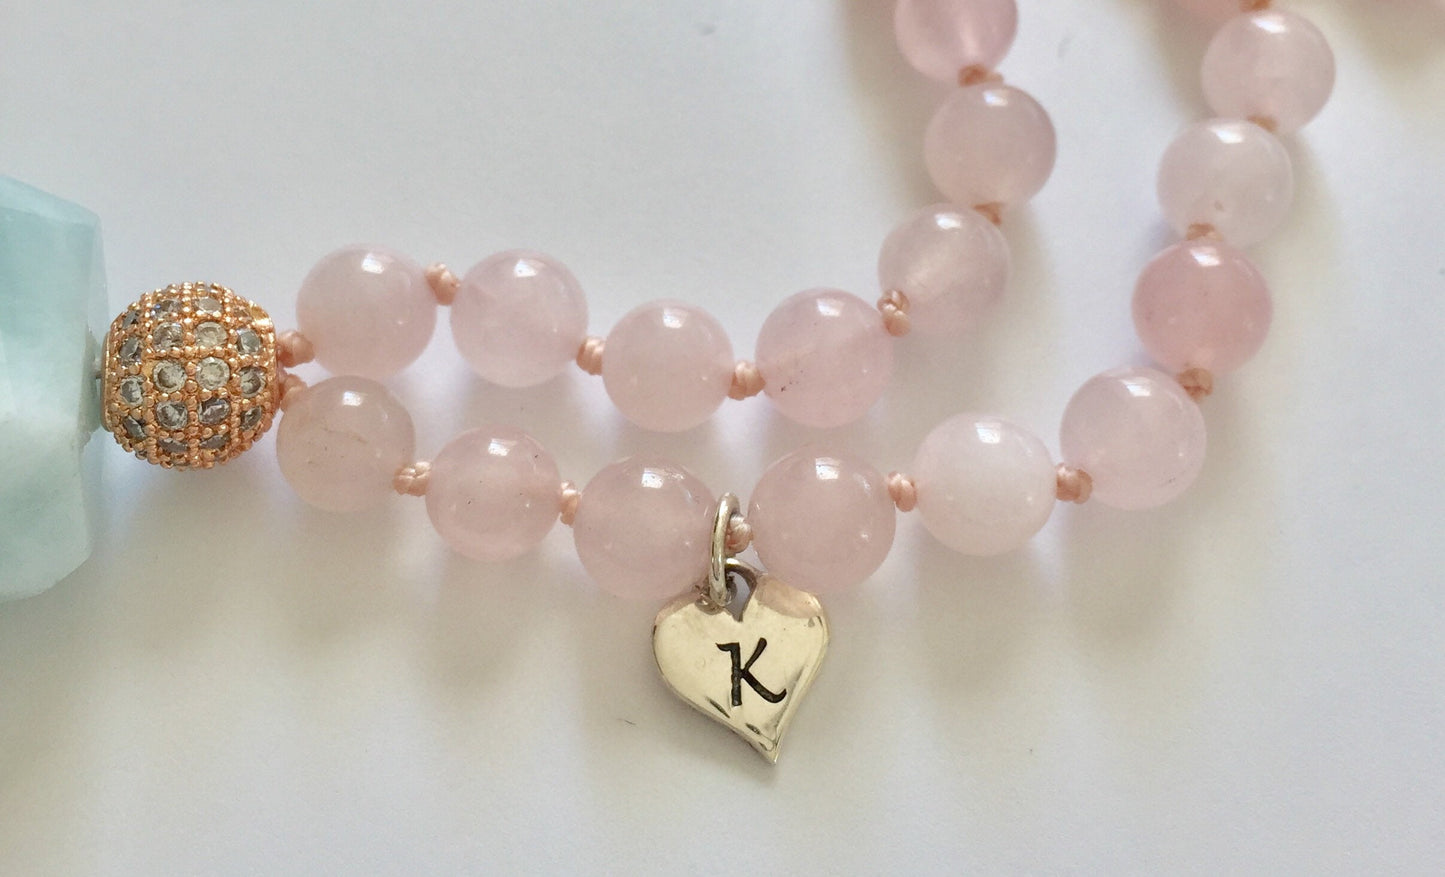 rose quartz mala necklace with rose gold plated guru bead and sterling silver heart shaped K charm